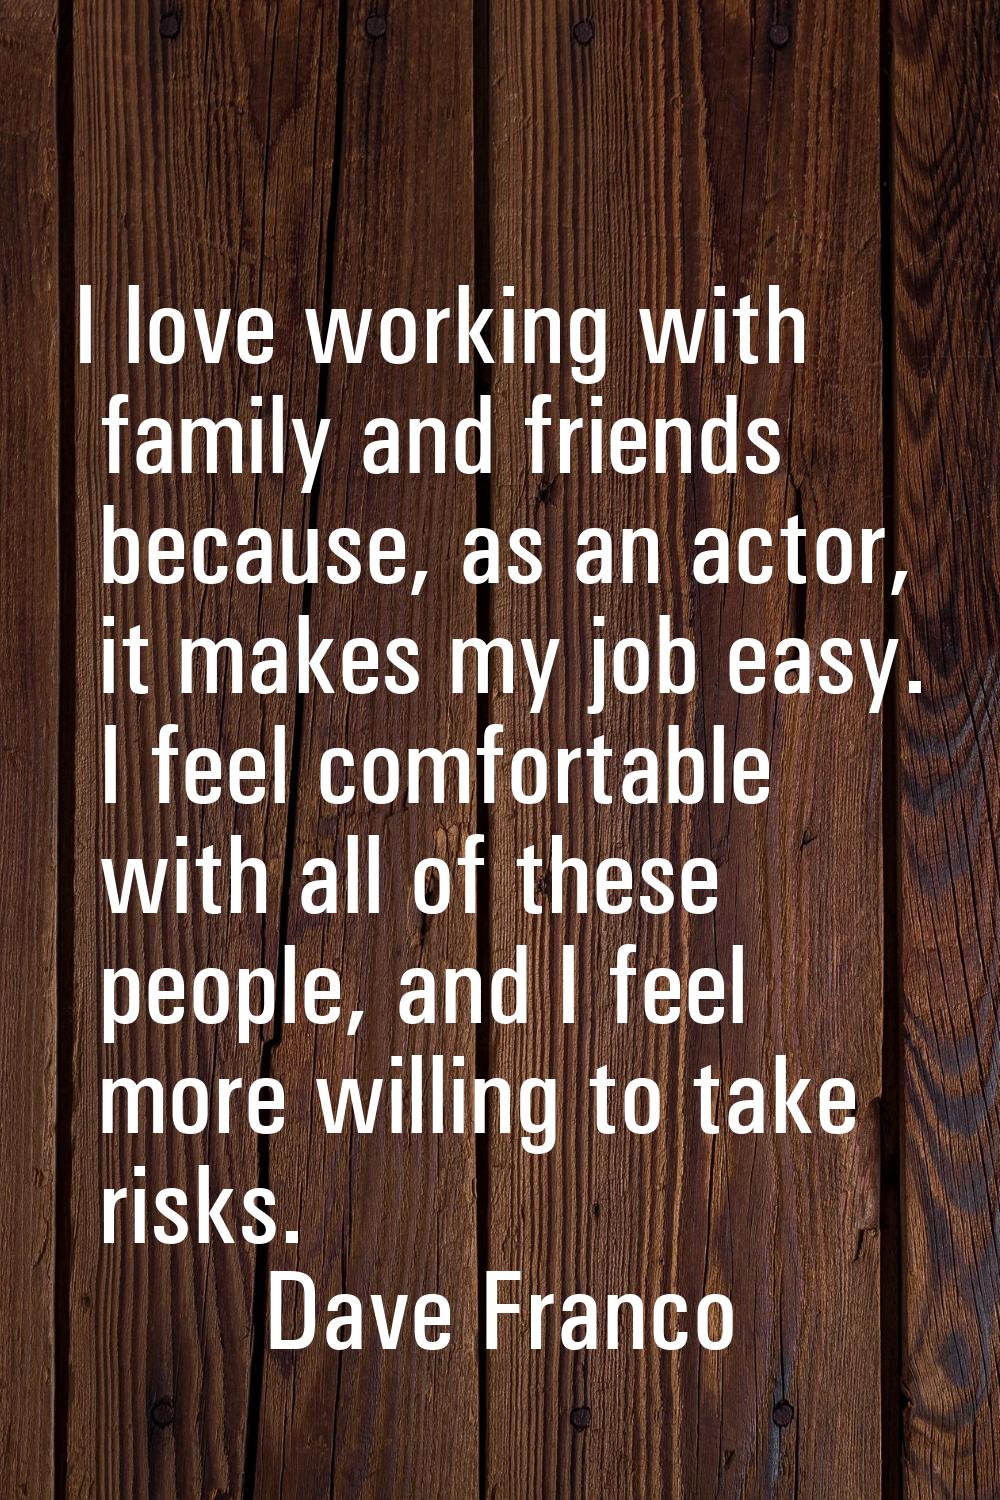 I love working with family and friends because, as an actor, it makes my job easy. I feel comfortab